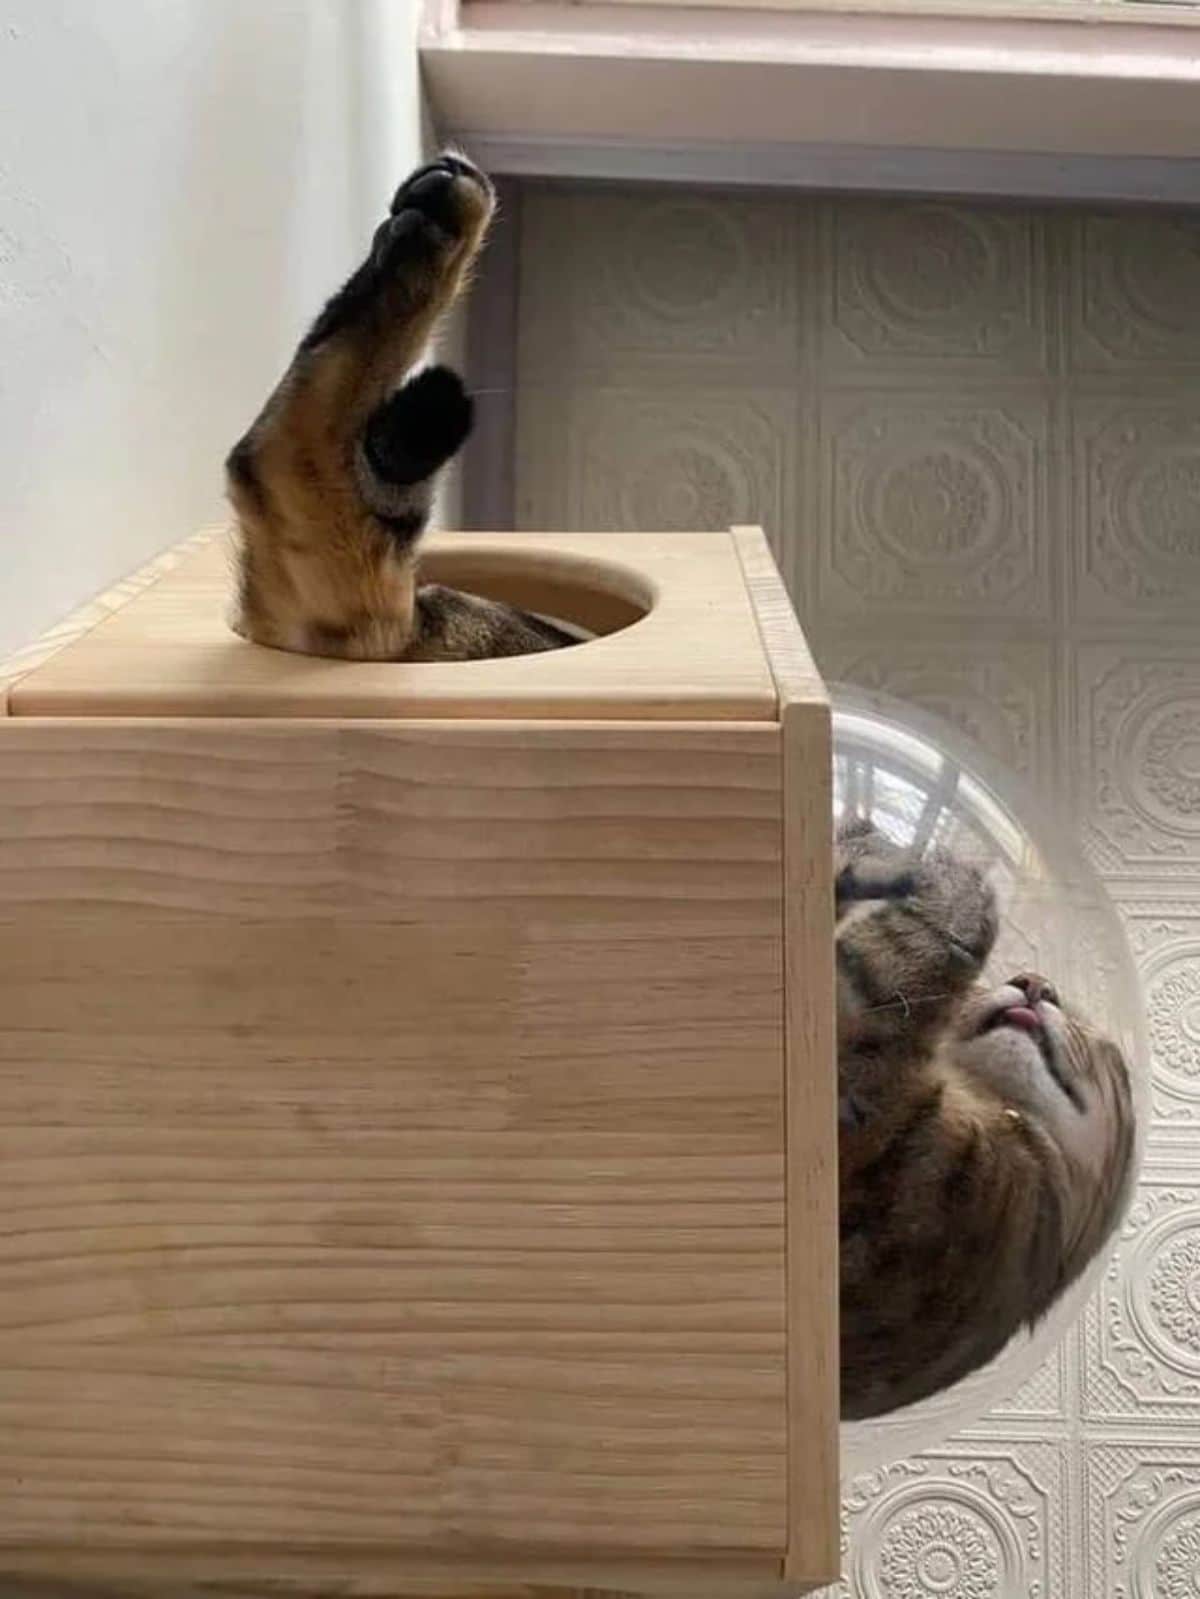 brown tabby cat sleeping with the legs sticking out through a hole at the top of a wooden box and the head showing below and on the side in a glass bubble